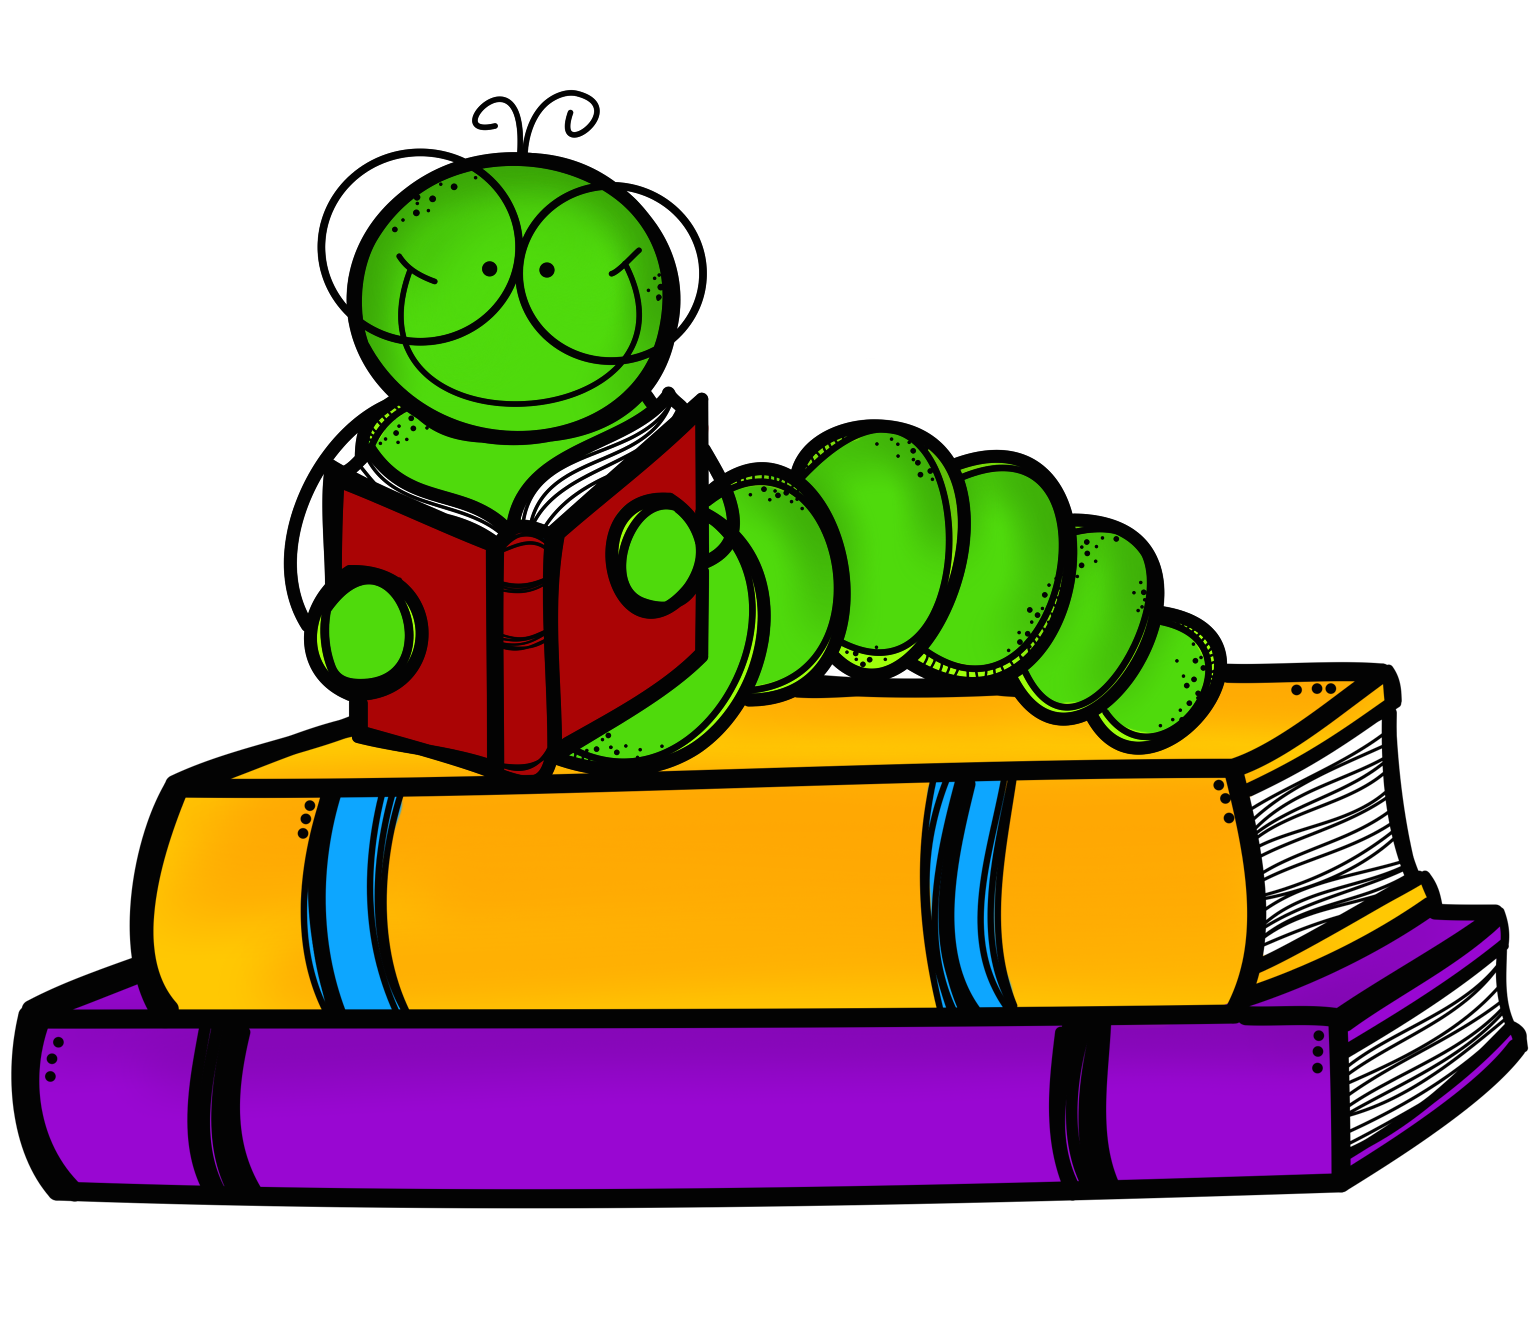 Website clipart bibliography. Stack cliparts add cool